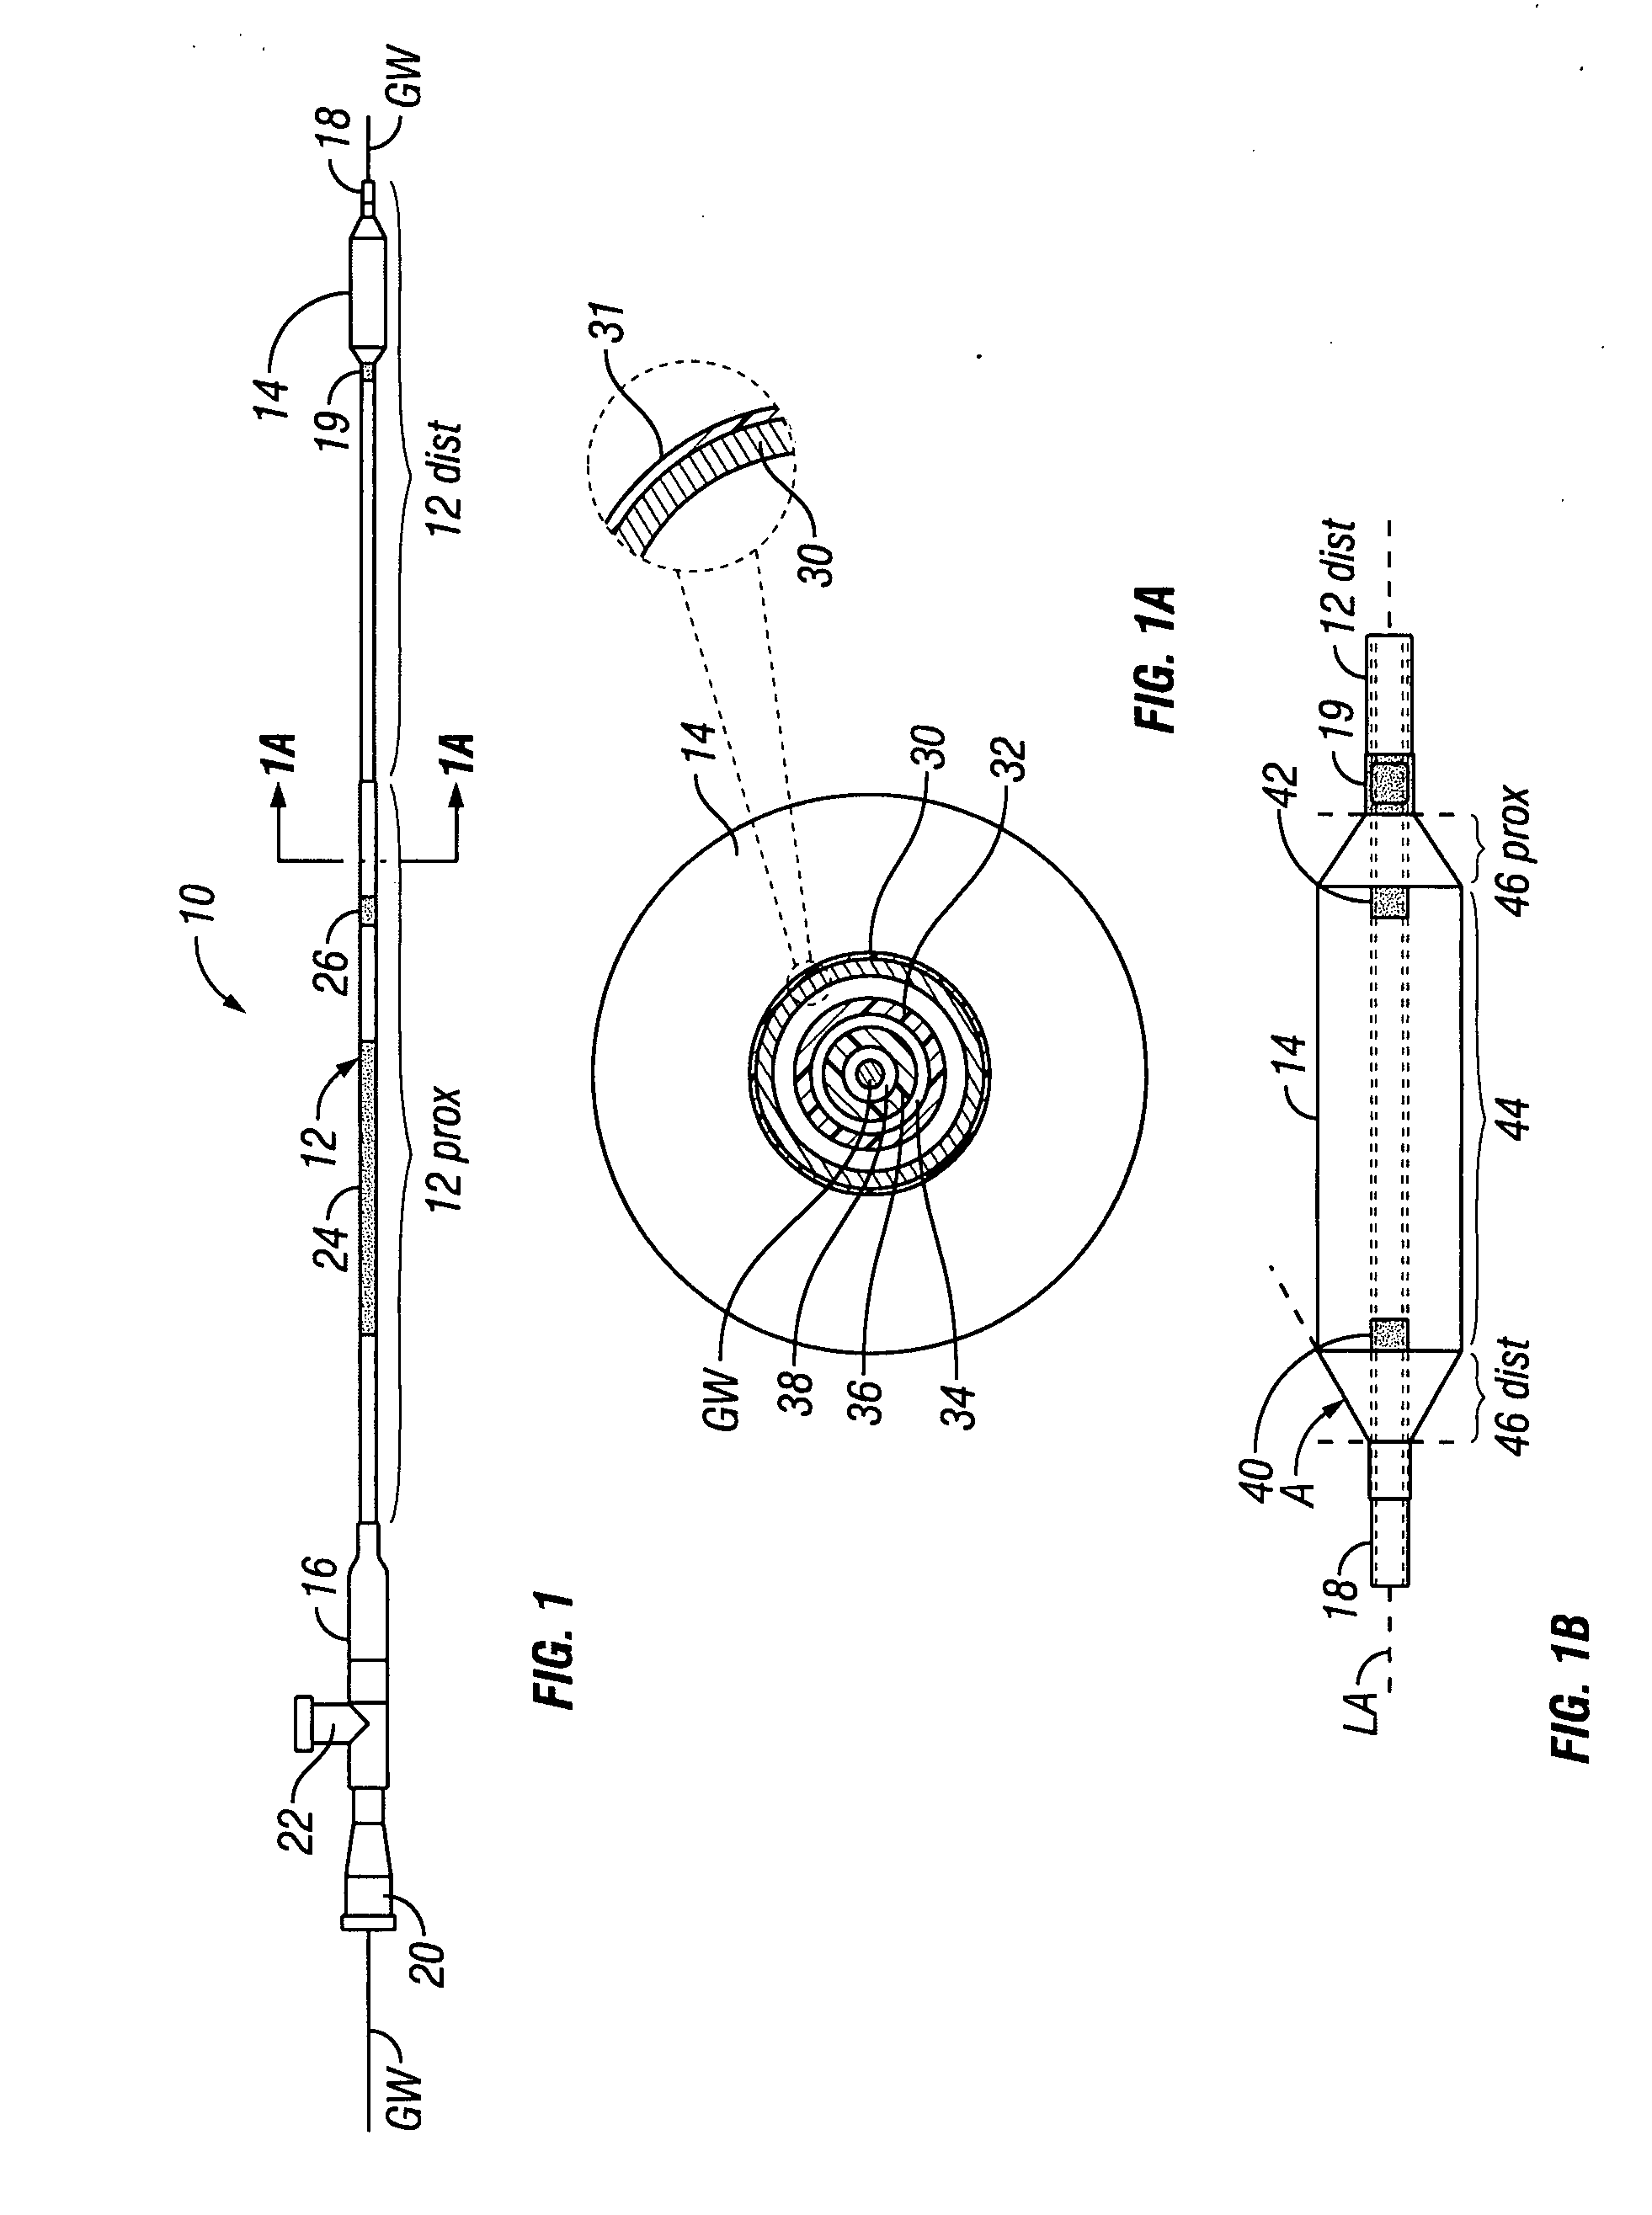 Systems and methods for transnasal dilation of passageways in the ear, nose and throat